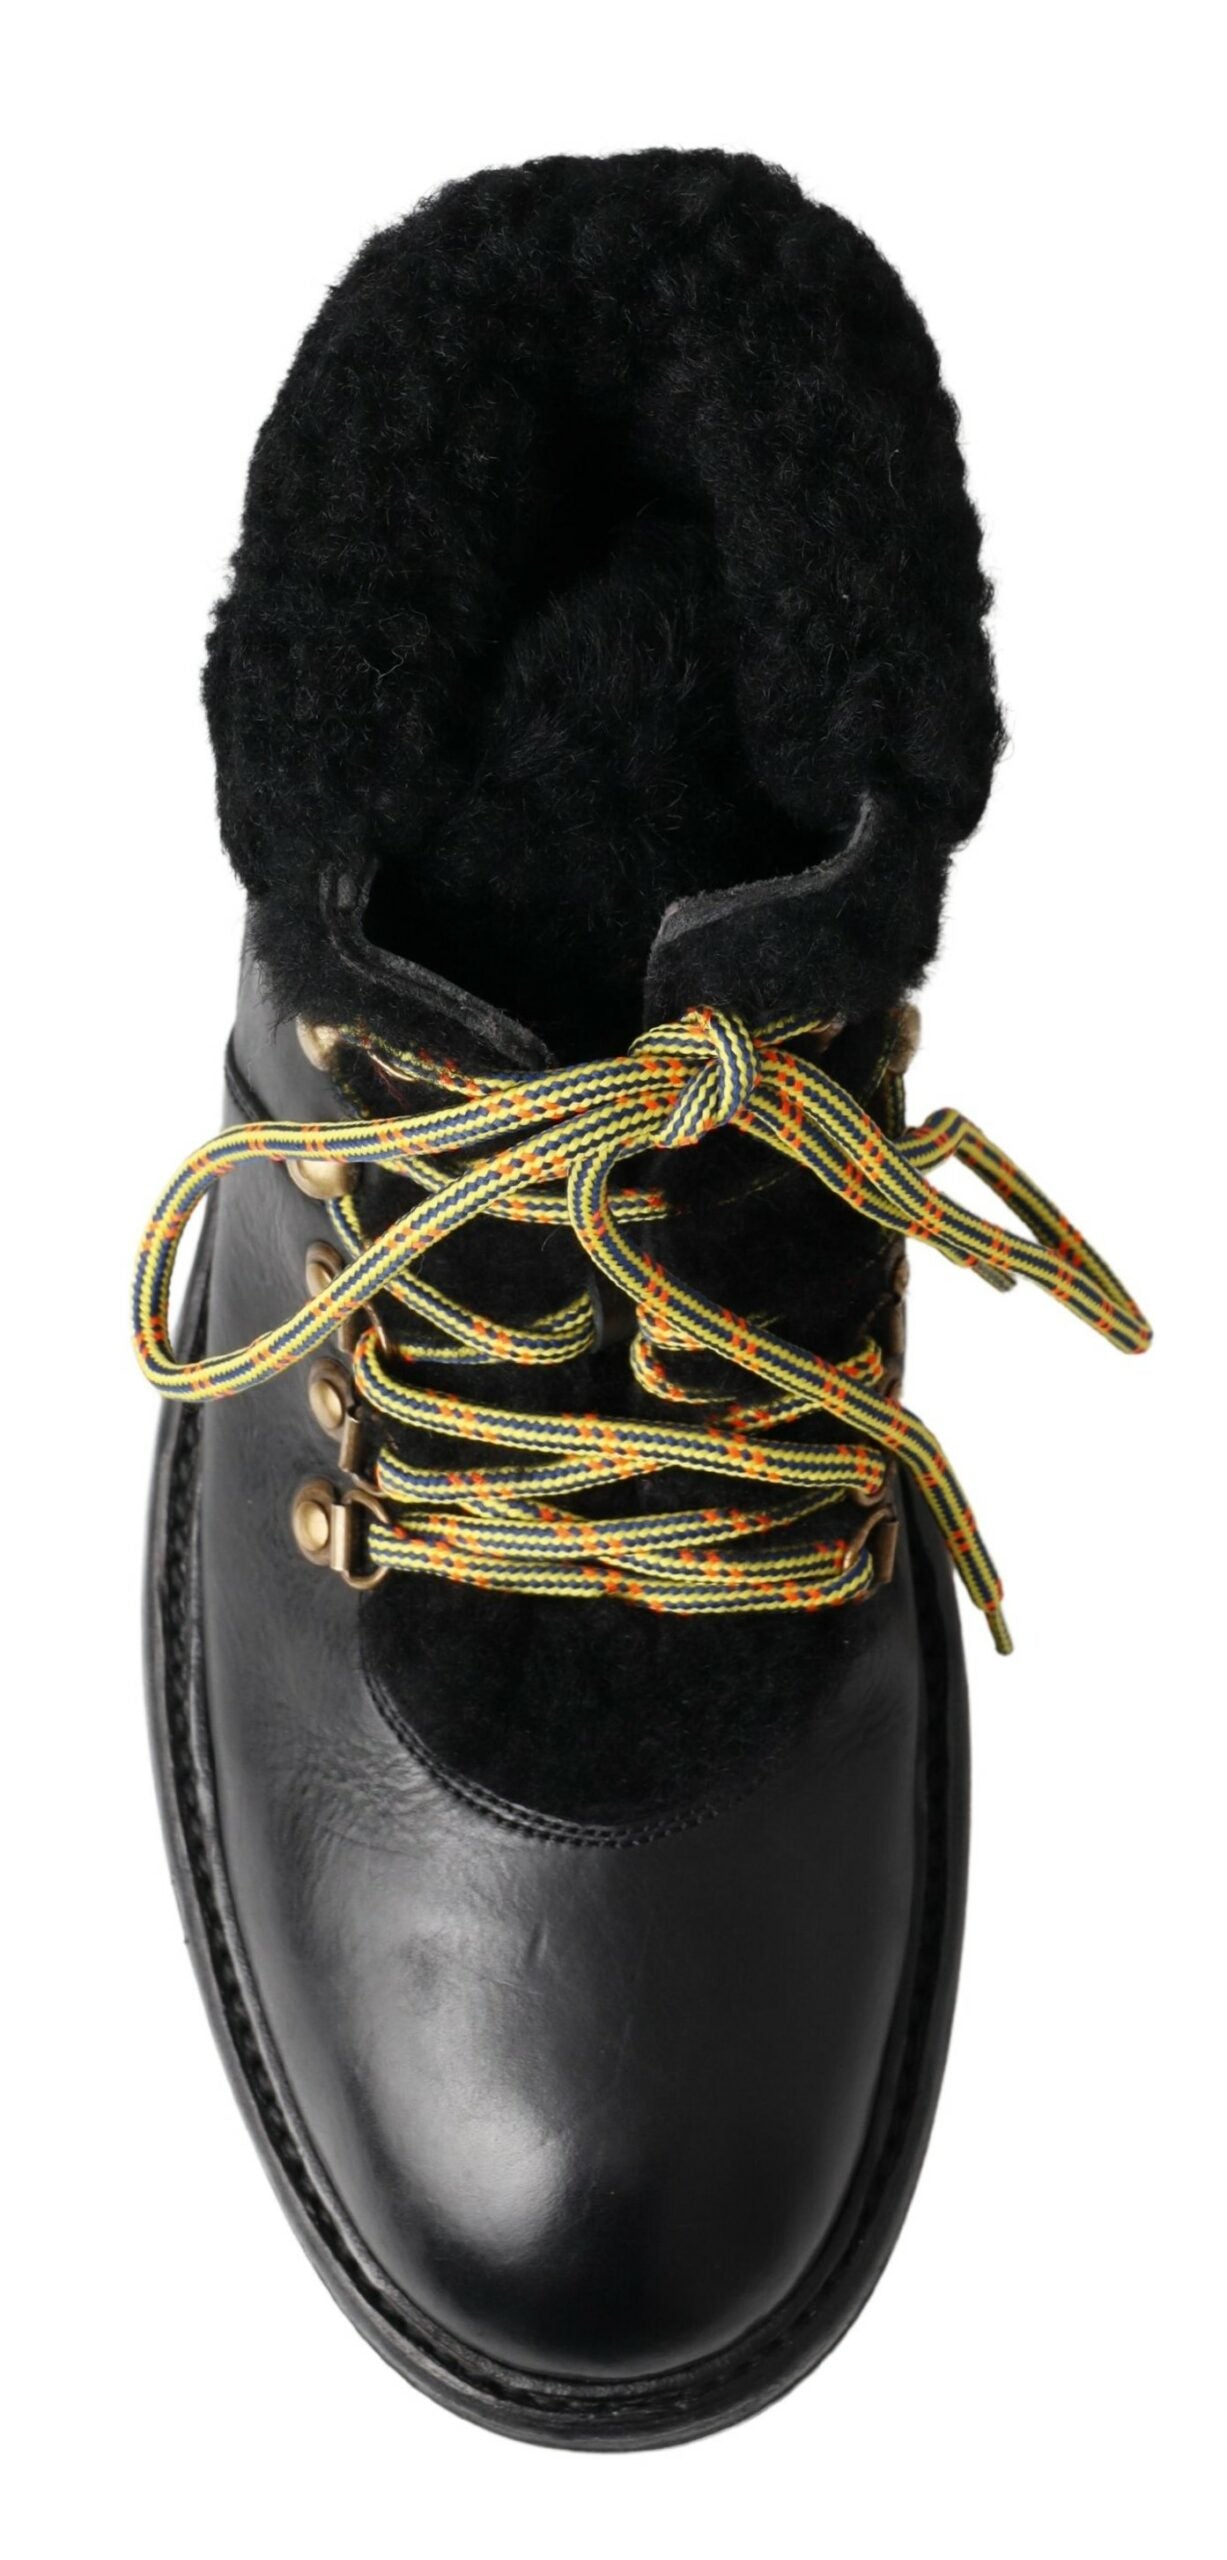 Dolce & Gabbana Elegant Shearling Style Men's Leather Boots